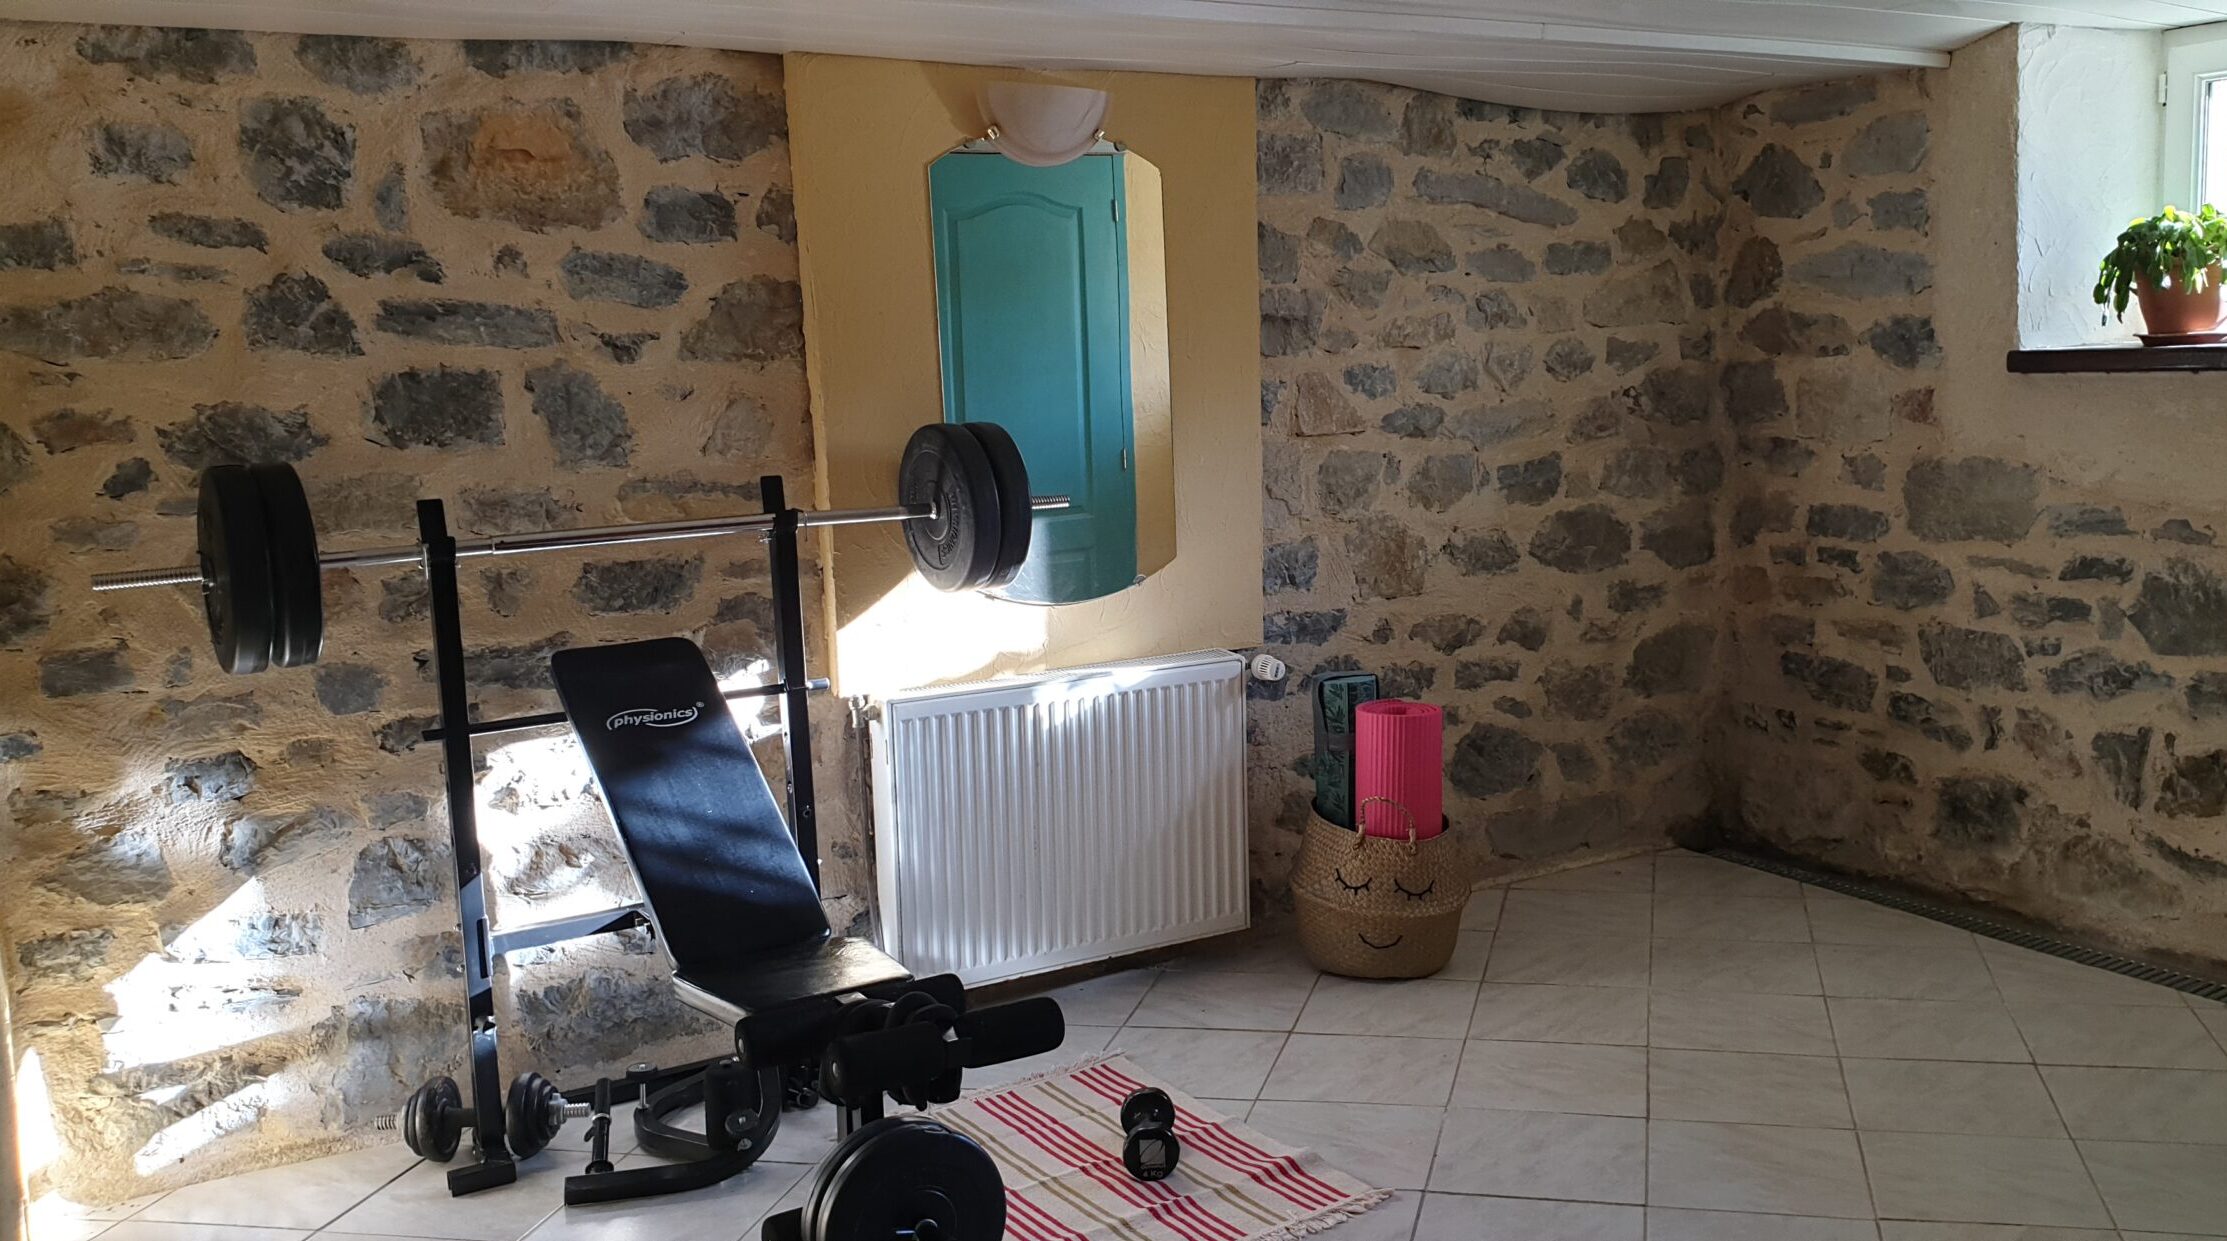 Gym with weights bench and yoga mats at Chez Montagnes holiday rental in the South of France